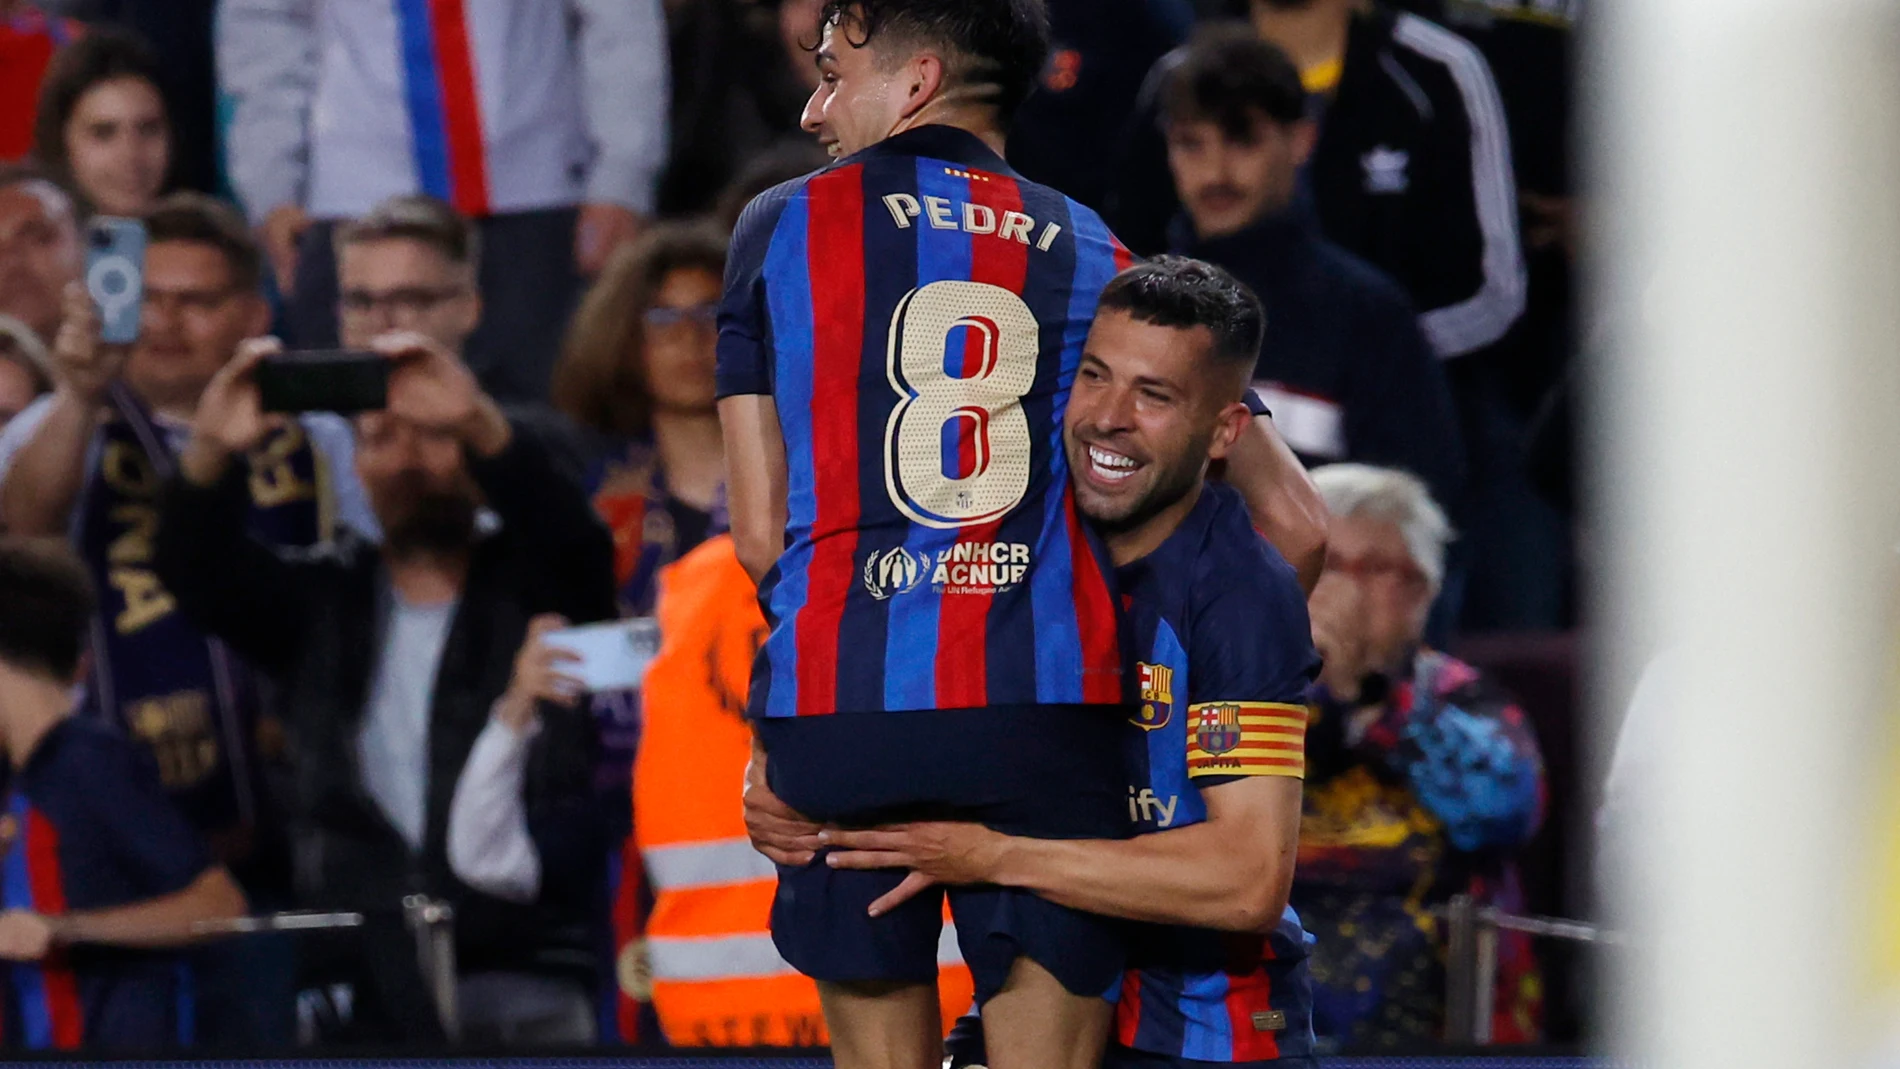 Barcelona's Jordi Alba, right, celebrates after scoring his side's opening goal during a Spanish La Liga soccer match between Barcelona and Osasuna at the Camp Nou stadium in Barcelona, Spain, Tuesday, May 2, 2023. (AP Photo/Joan Monfort)